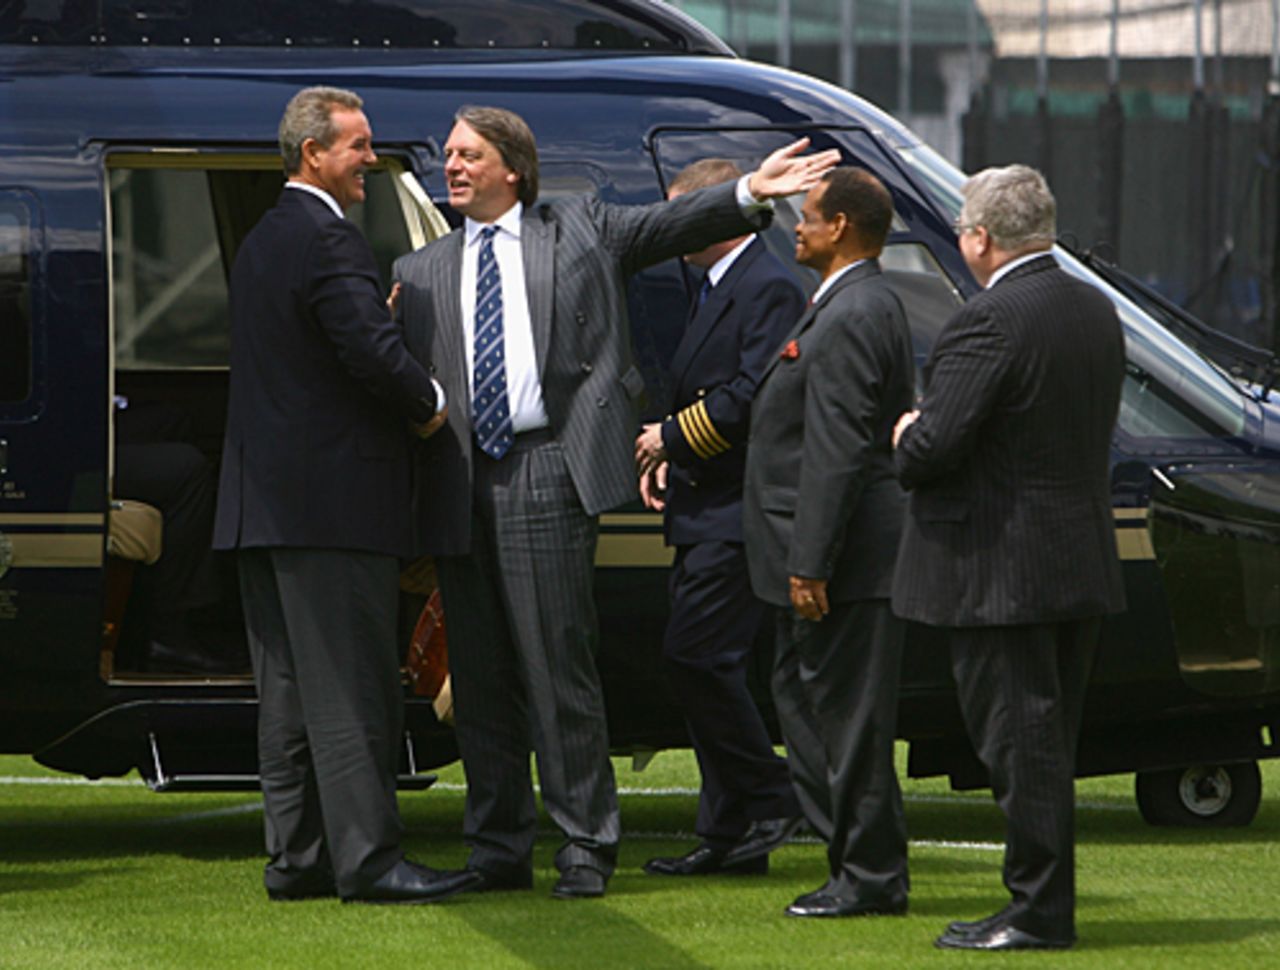 Allen Stanford arrives at Lord's in style to launch Stanford 20-20 for 20, Lord's, June 11, 2008